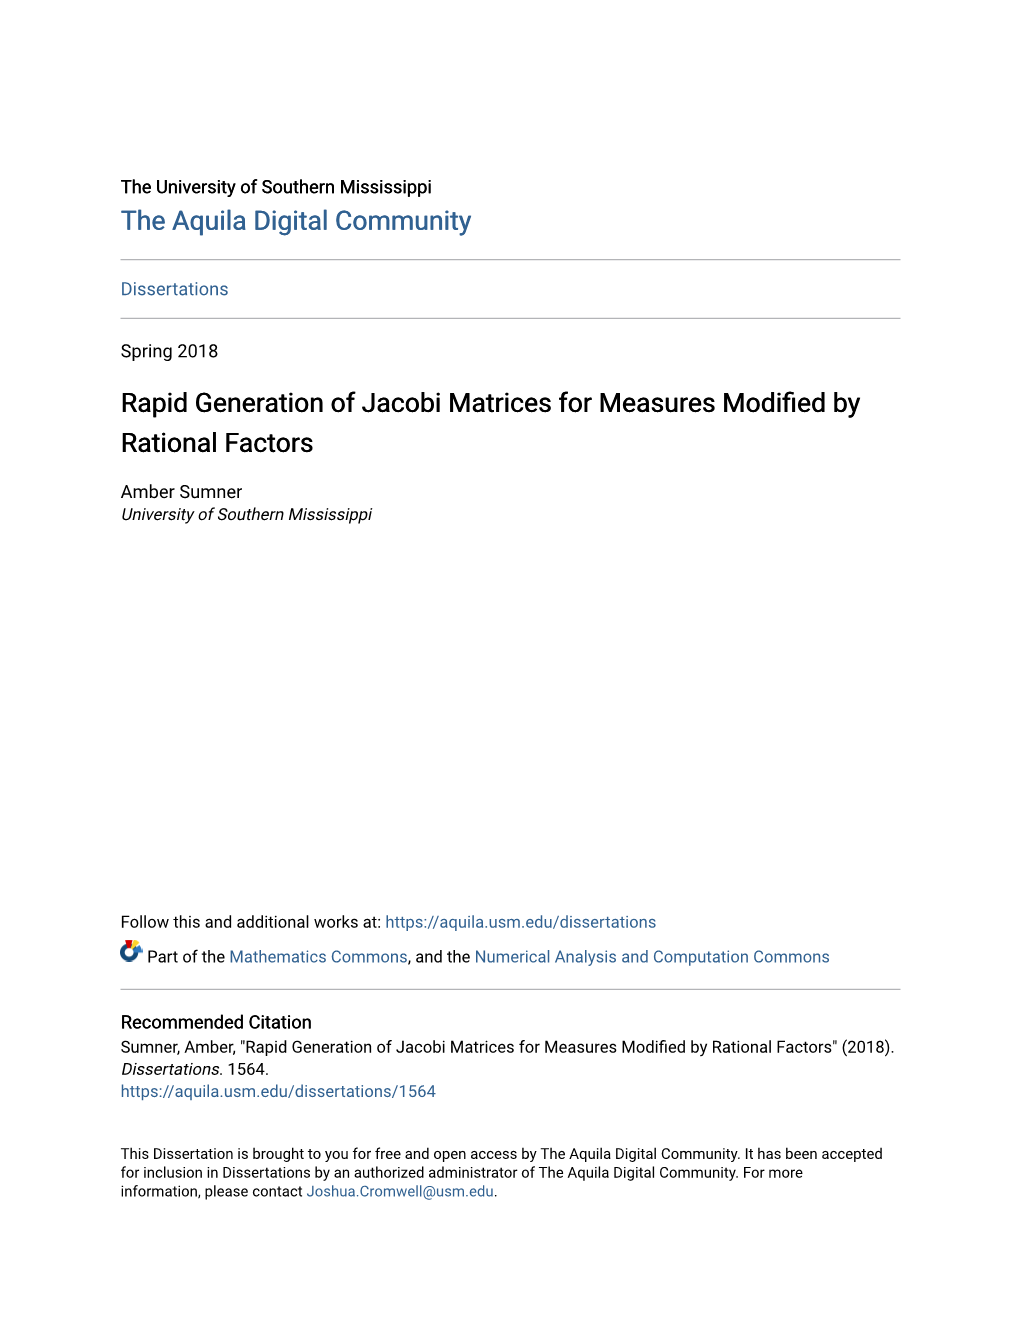 Rapid Generation of Jacobi Matrices for Measures Modified by Rational Factors" (2018)